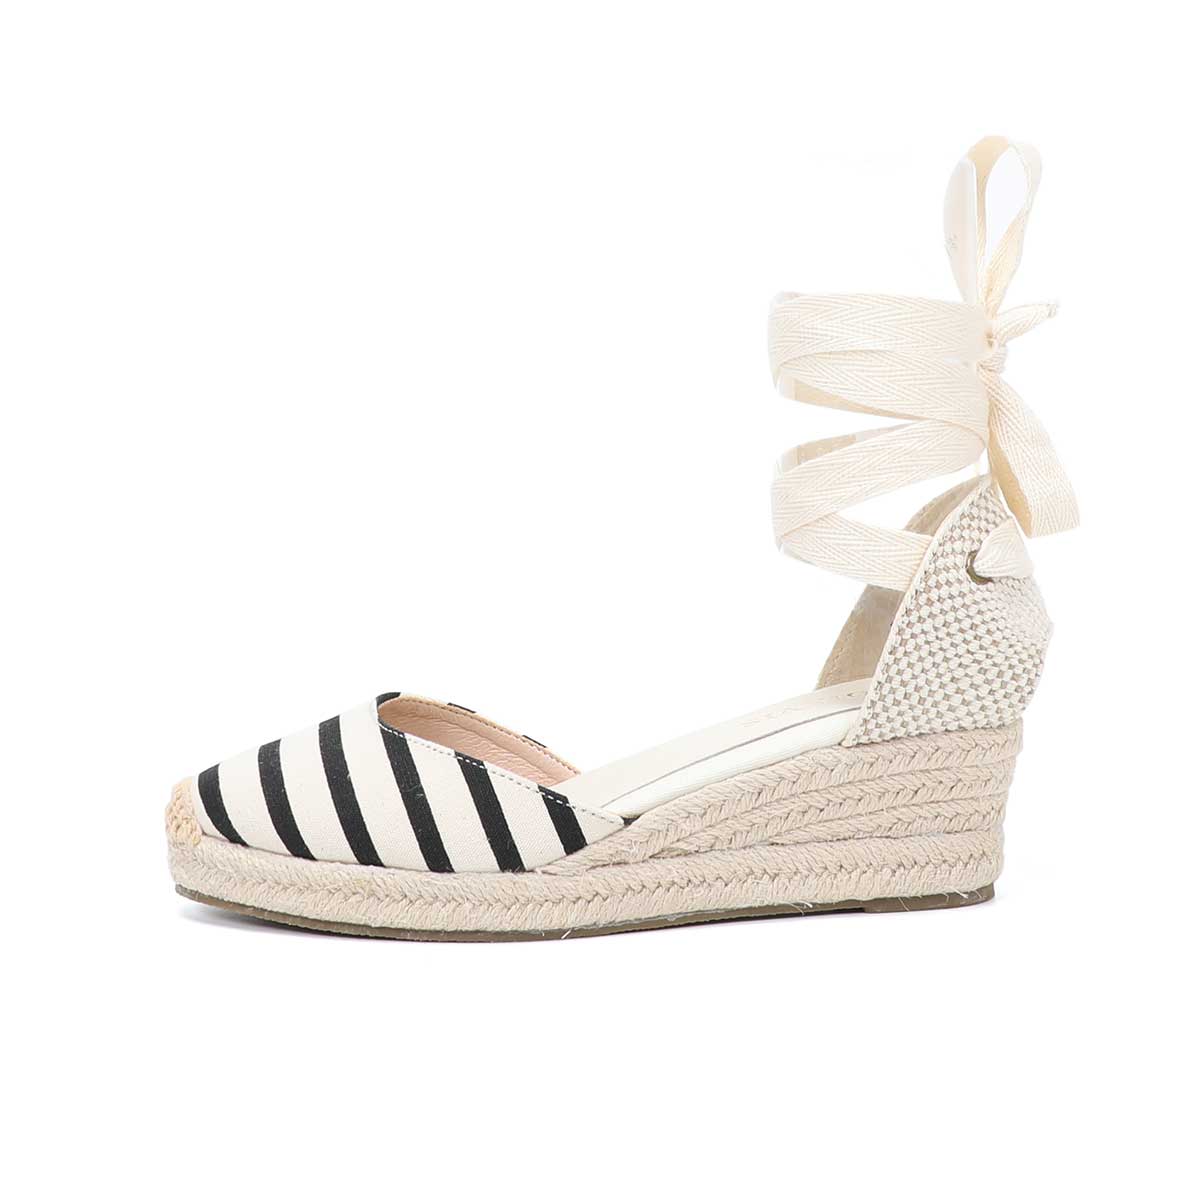 2022 Women's Wedge Low Heel Sandals Promotion Striped Canvas 0-3cm Casual Canvas Covered Sapato Feminino Sandalias Mujer